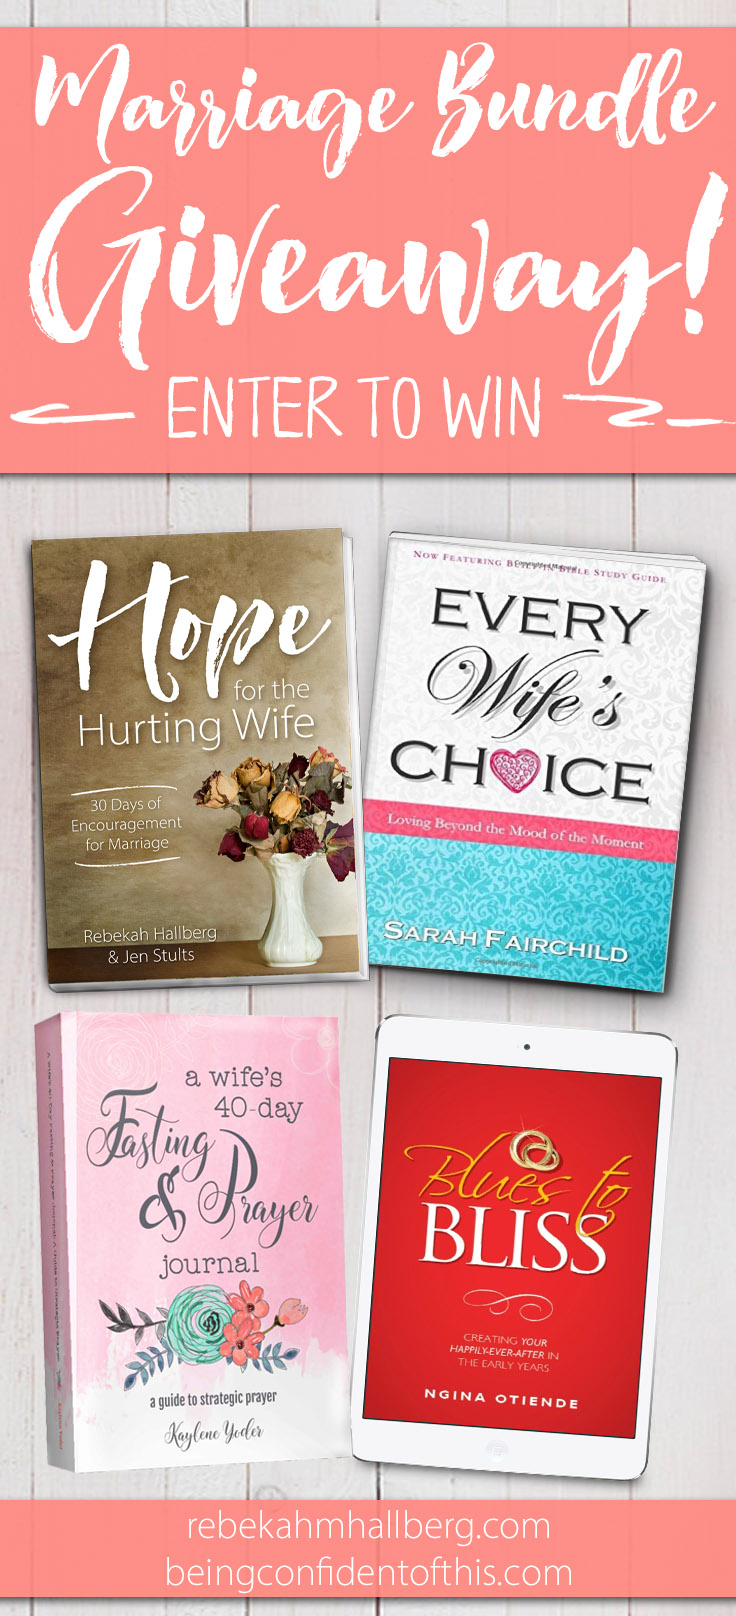 We're celebrating the launch of our new book Hope for the Hurting Wife by giving away a bundle of marriage books! Enter for your chance to win these four books written for wives! marriage books|Christian wife|godly wife|marriage growth|faith|bible studies|devotionals|encouragement for marriage|hope for the  hurting wife|prayer journal